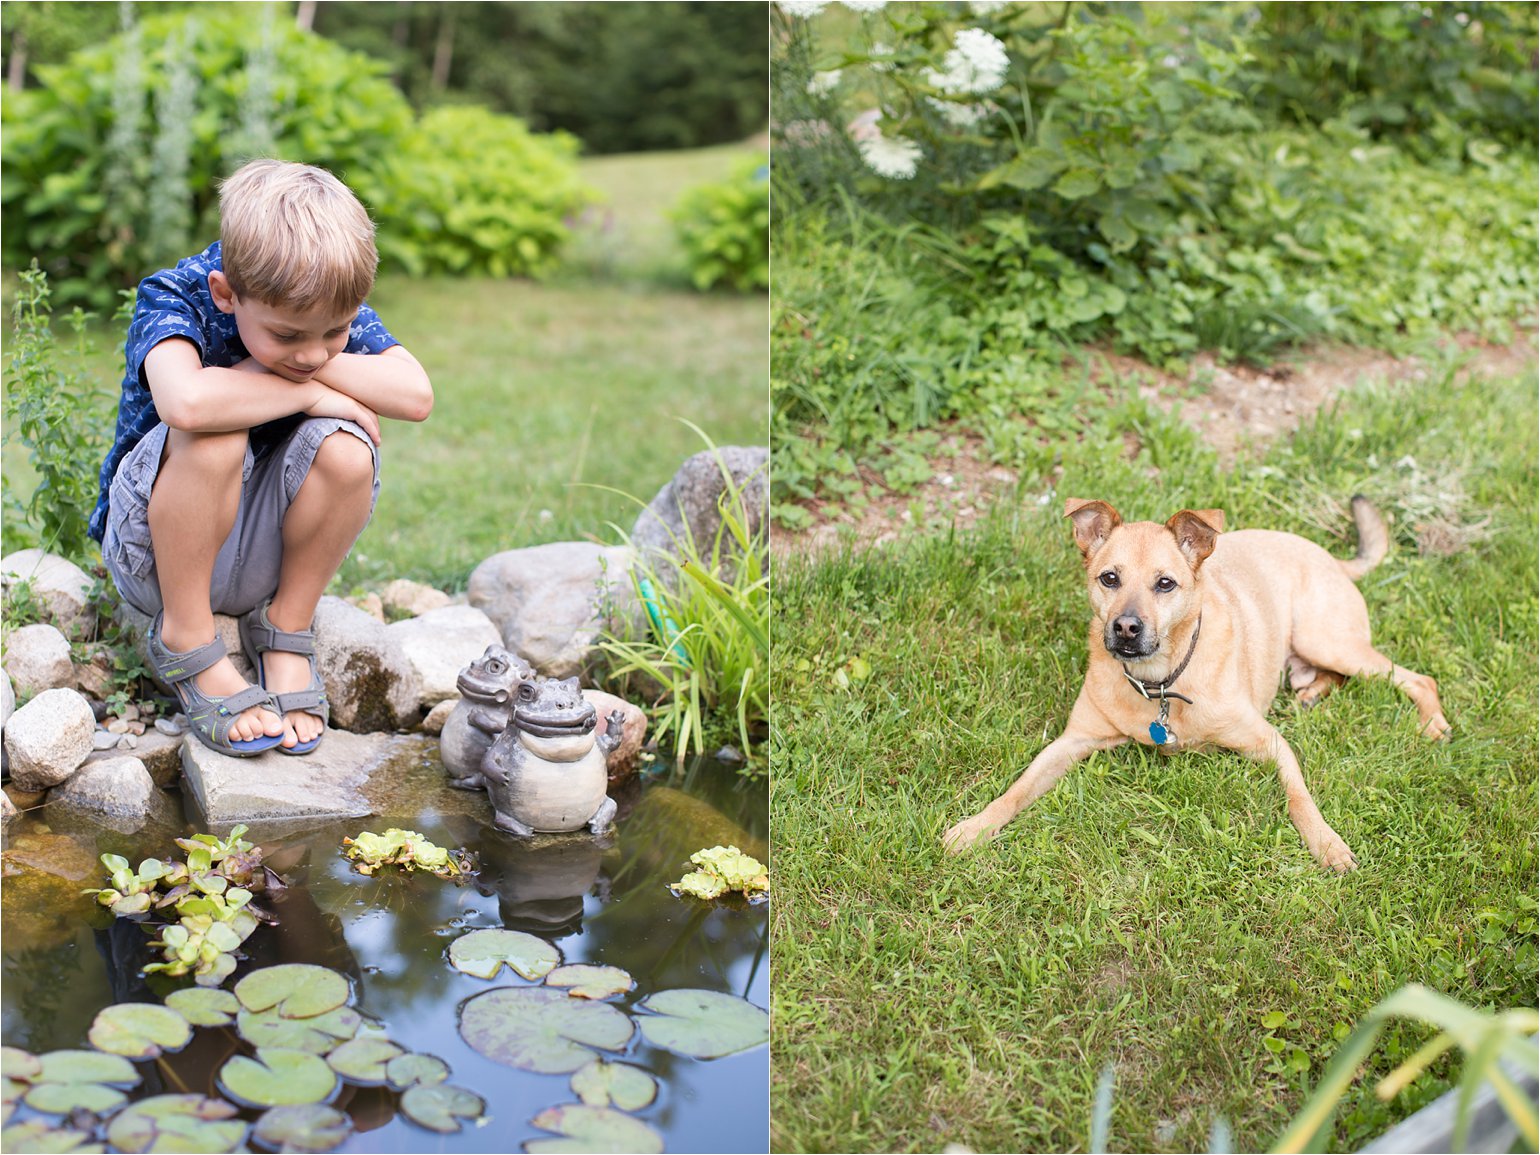 Boy and Dog at Frog Pond © 2015 Maundy Mitchell